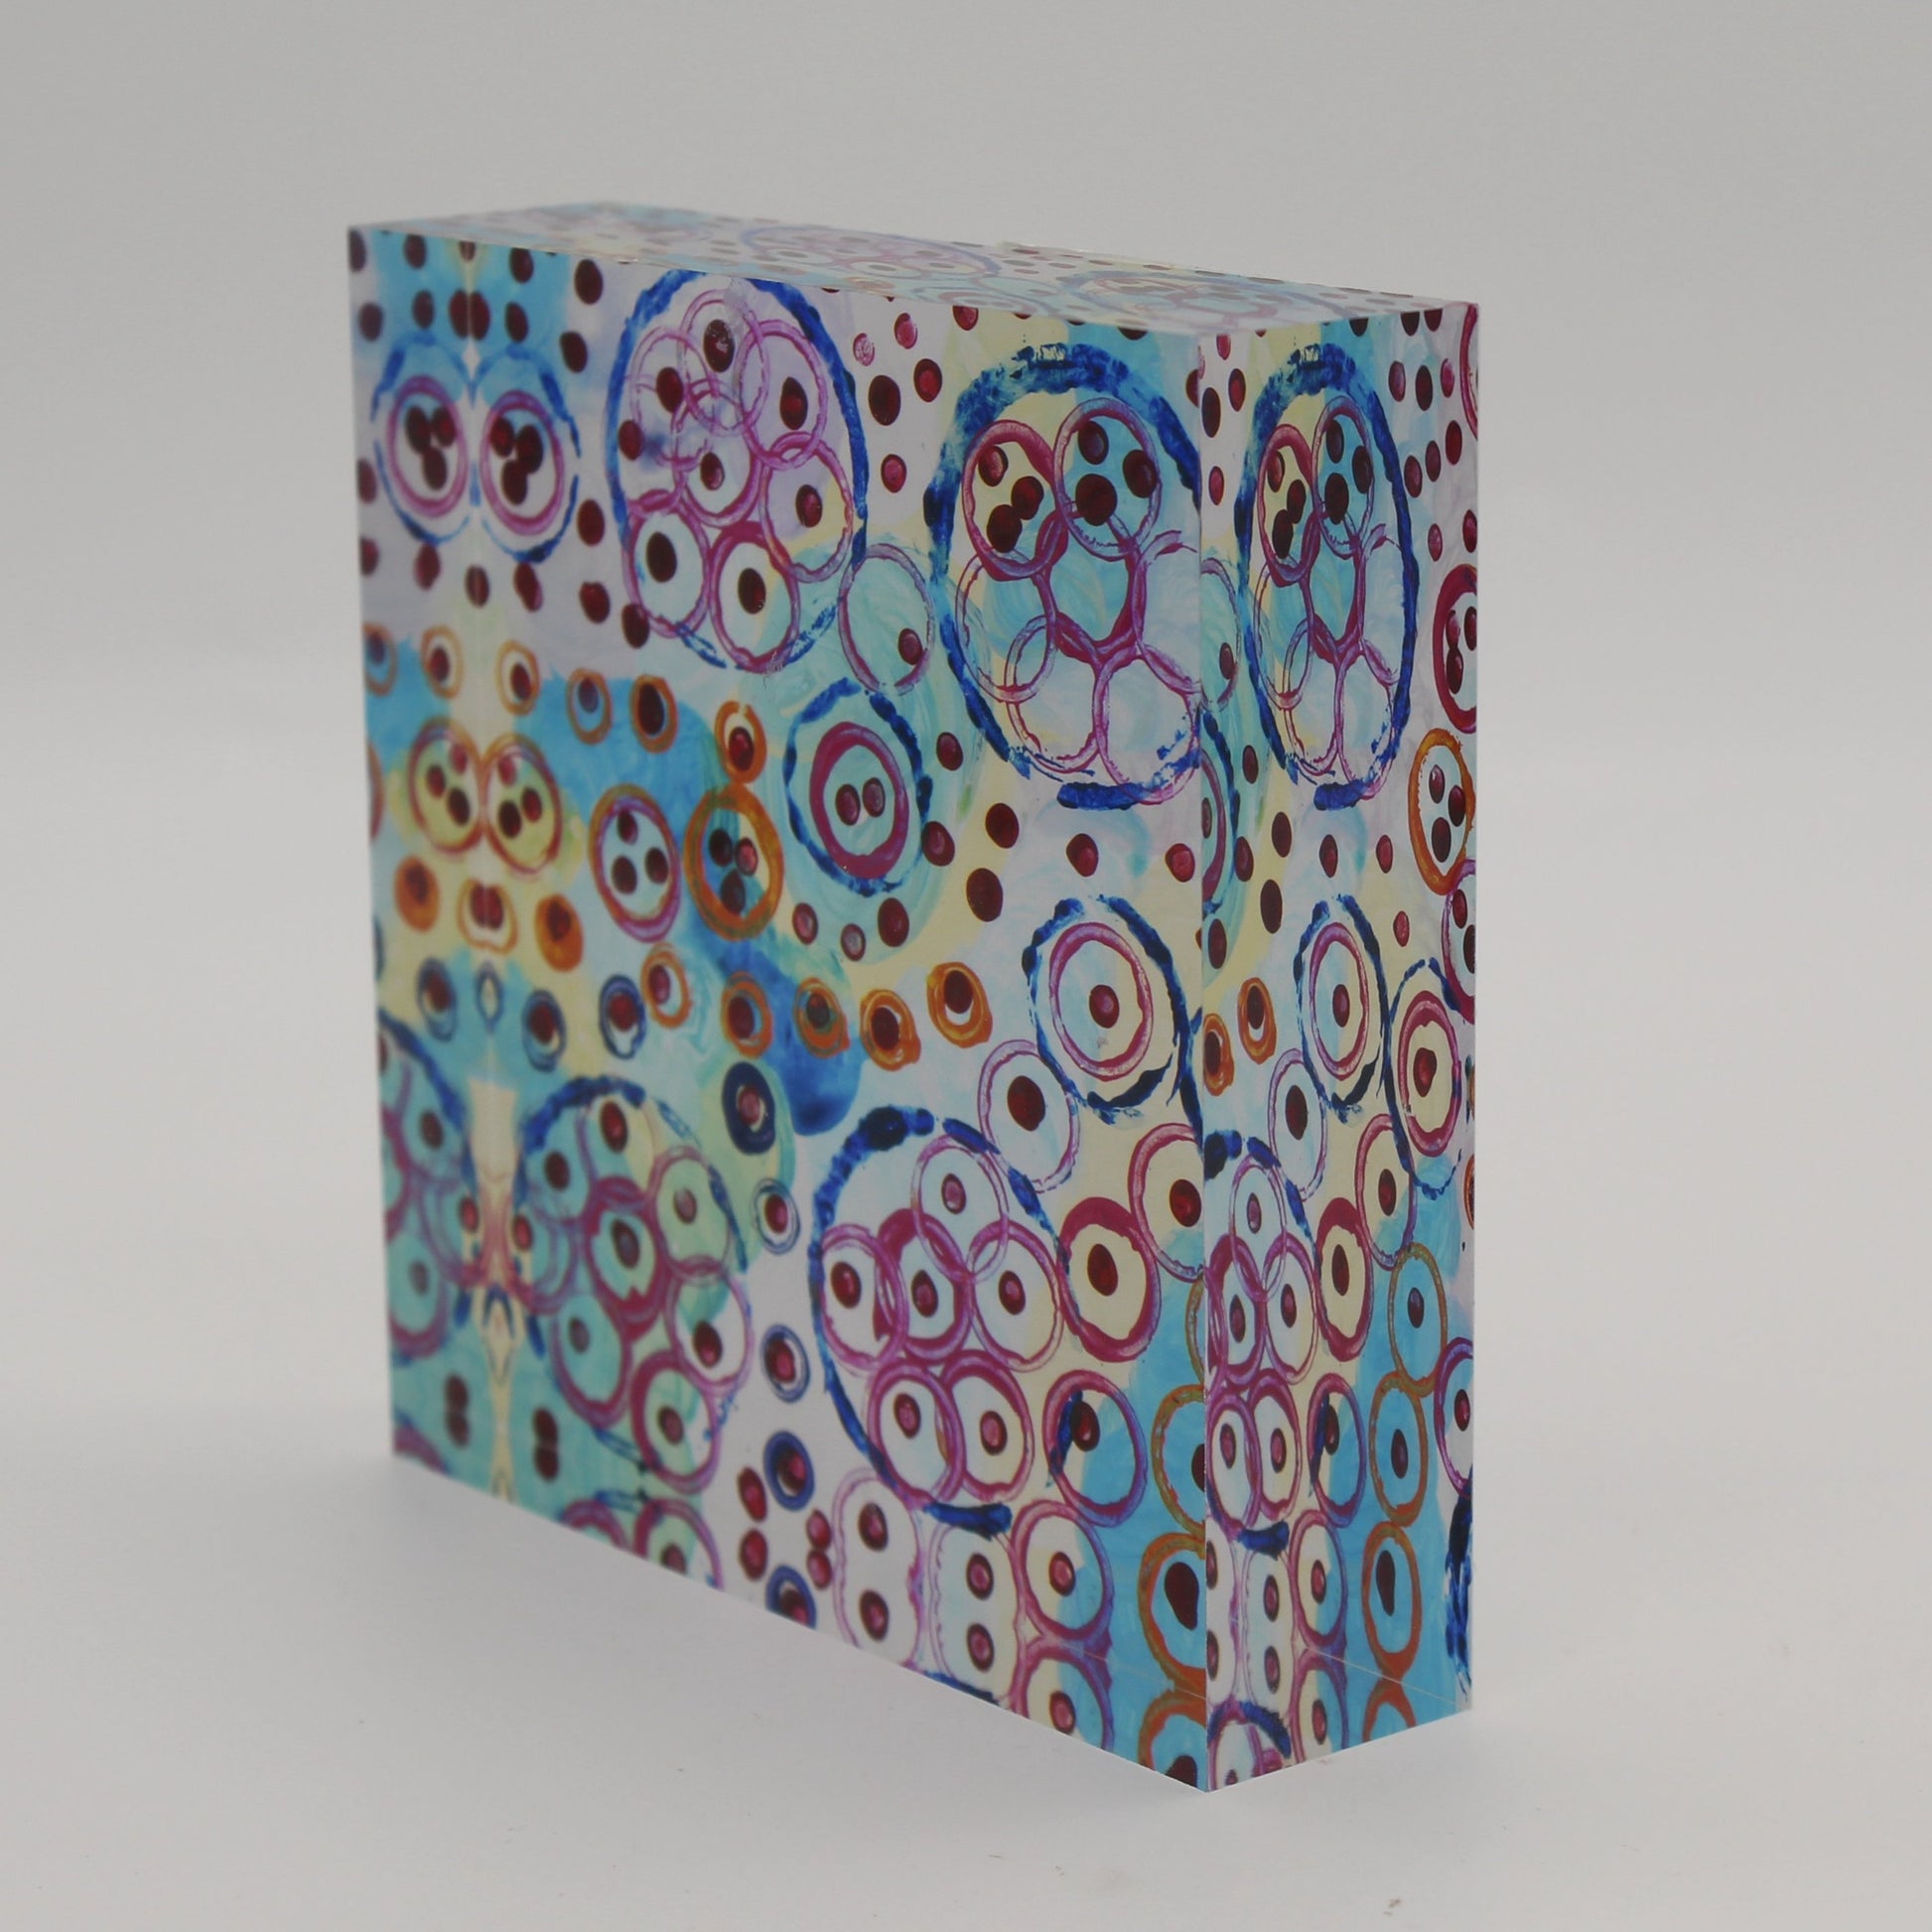 Tilted view of Acrylic block picture of blue, pink, and orange circles with maroon dots